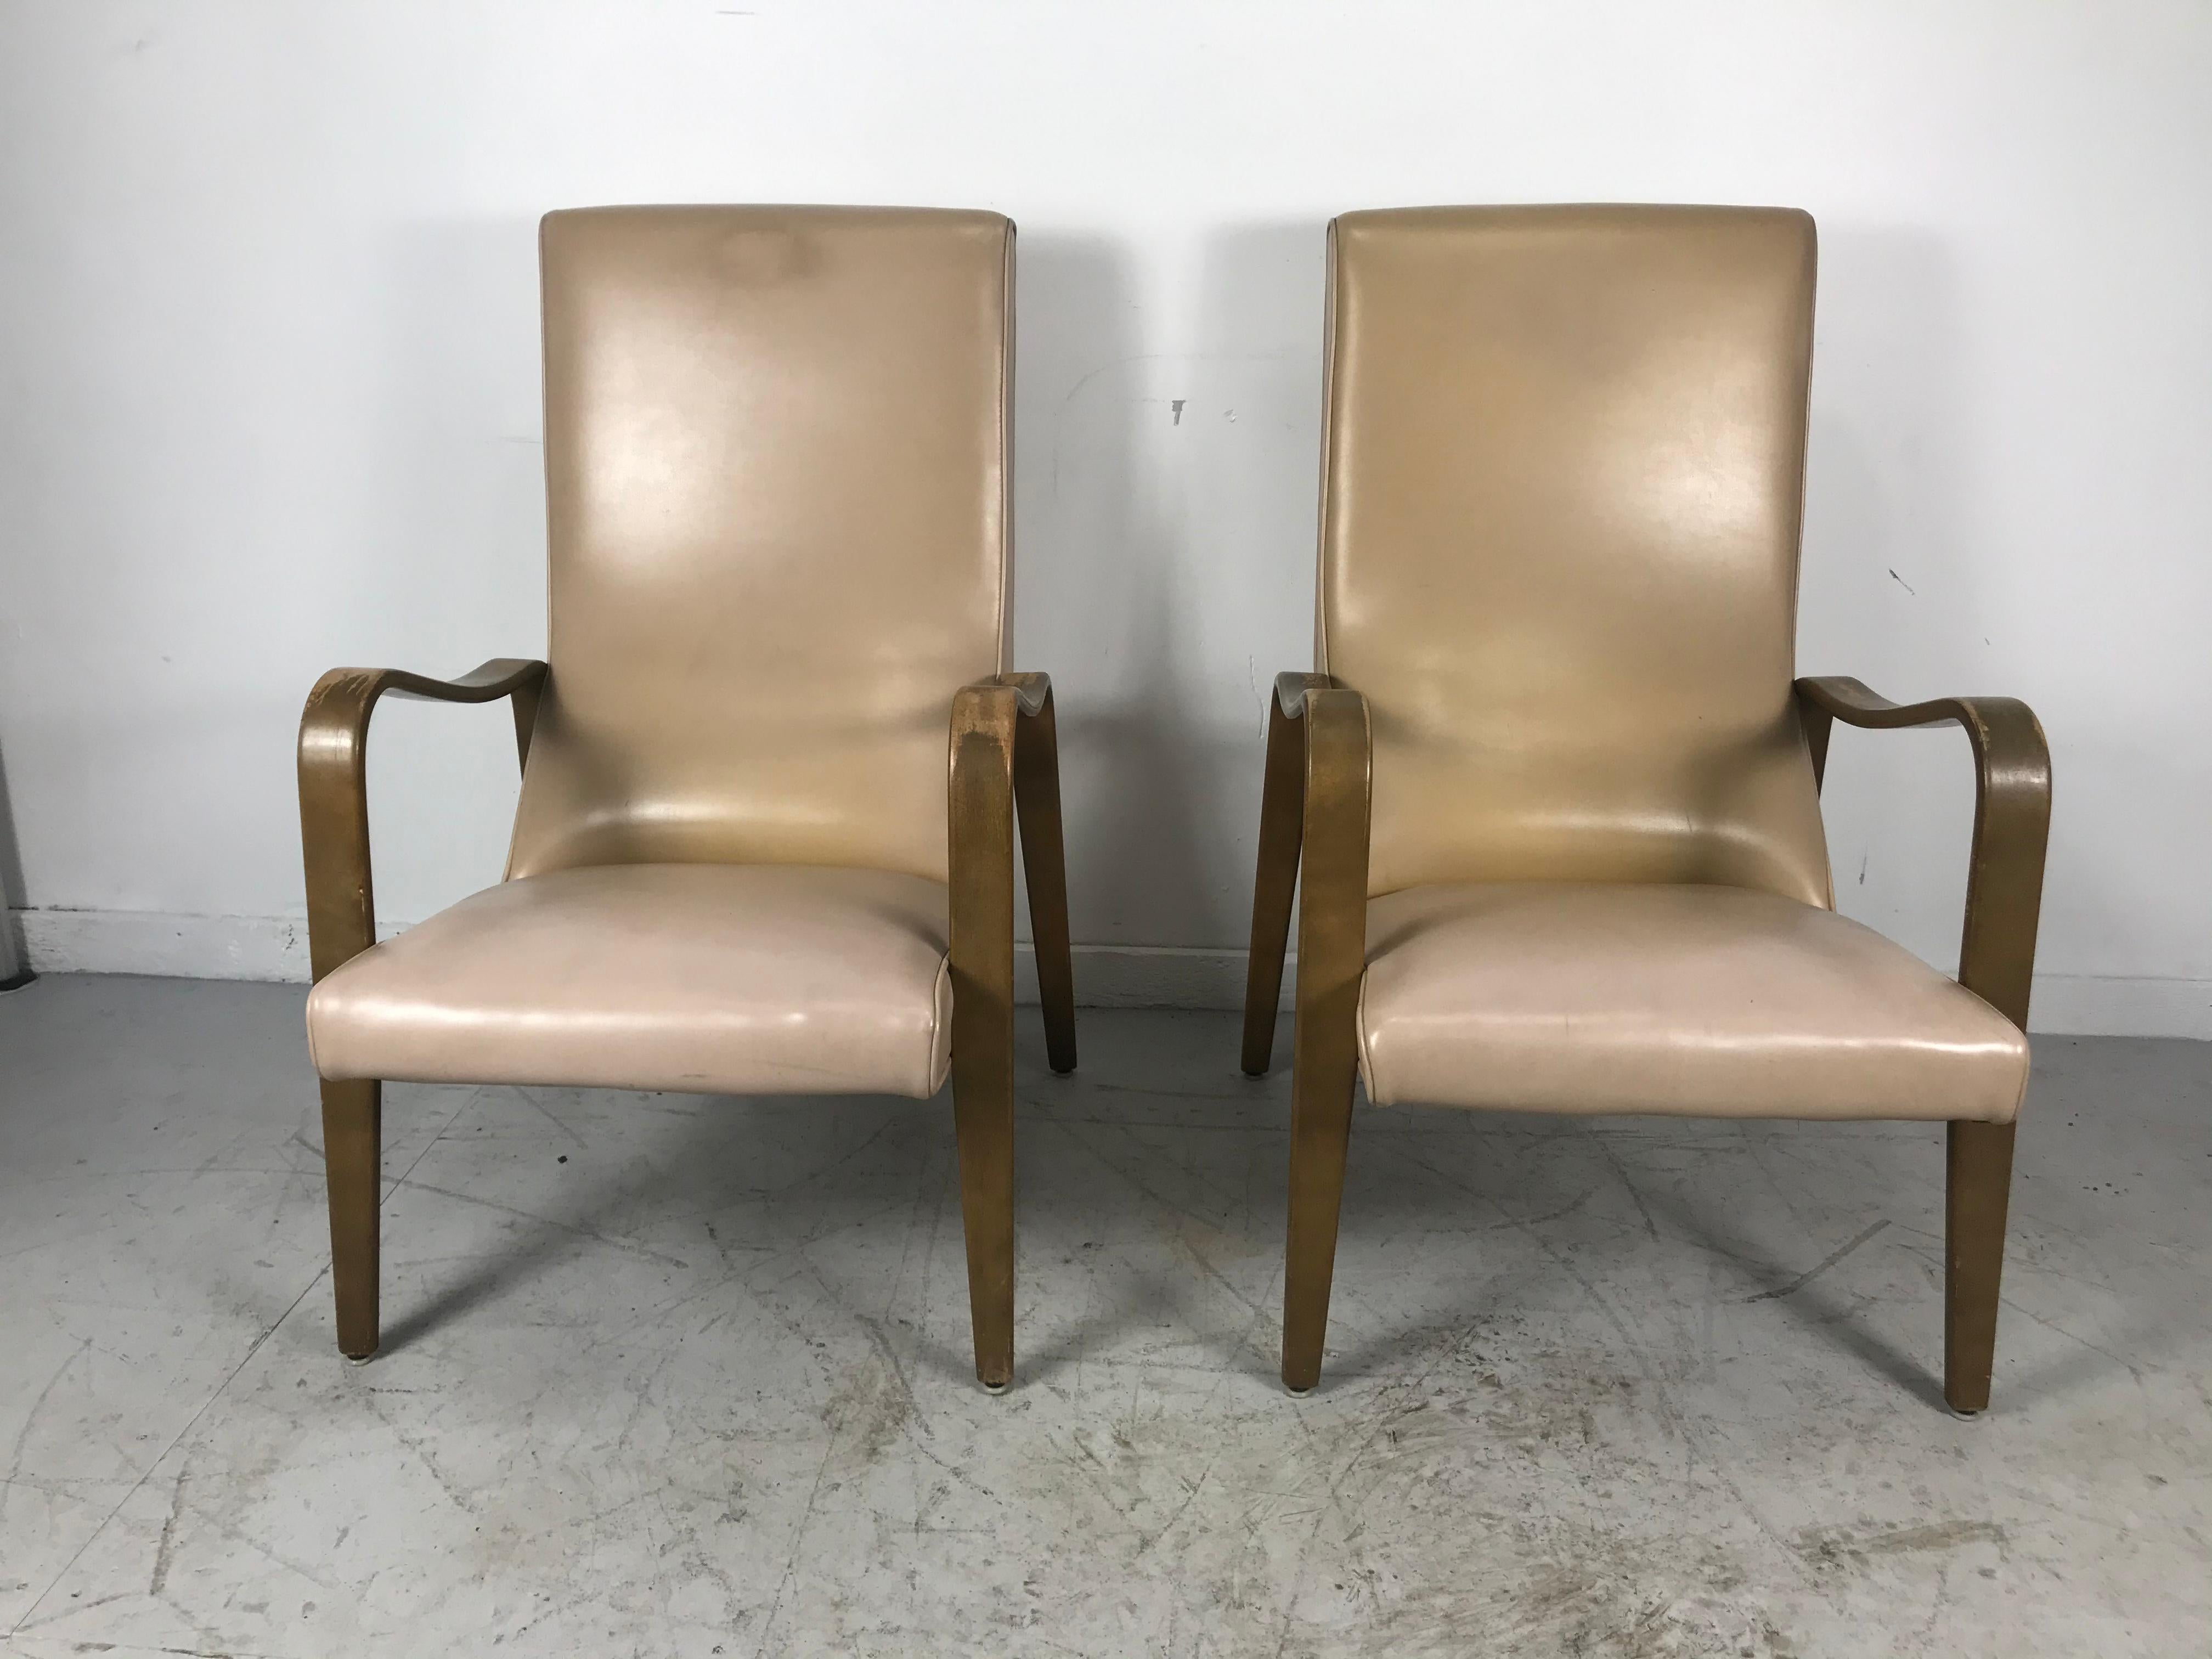 American Pair of Classic Mid-Century Modern Bentwood Lounge Chairs by Thonet For Sale